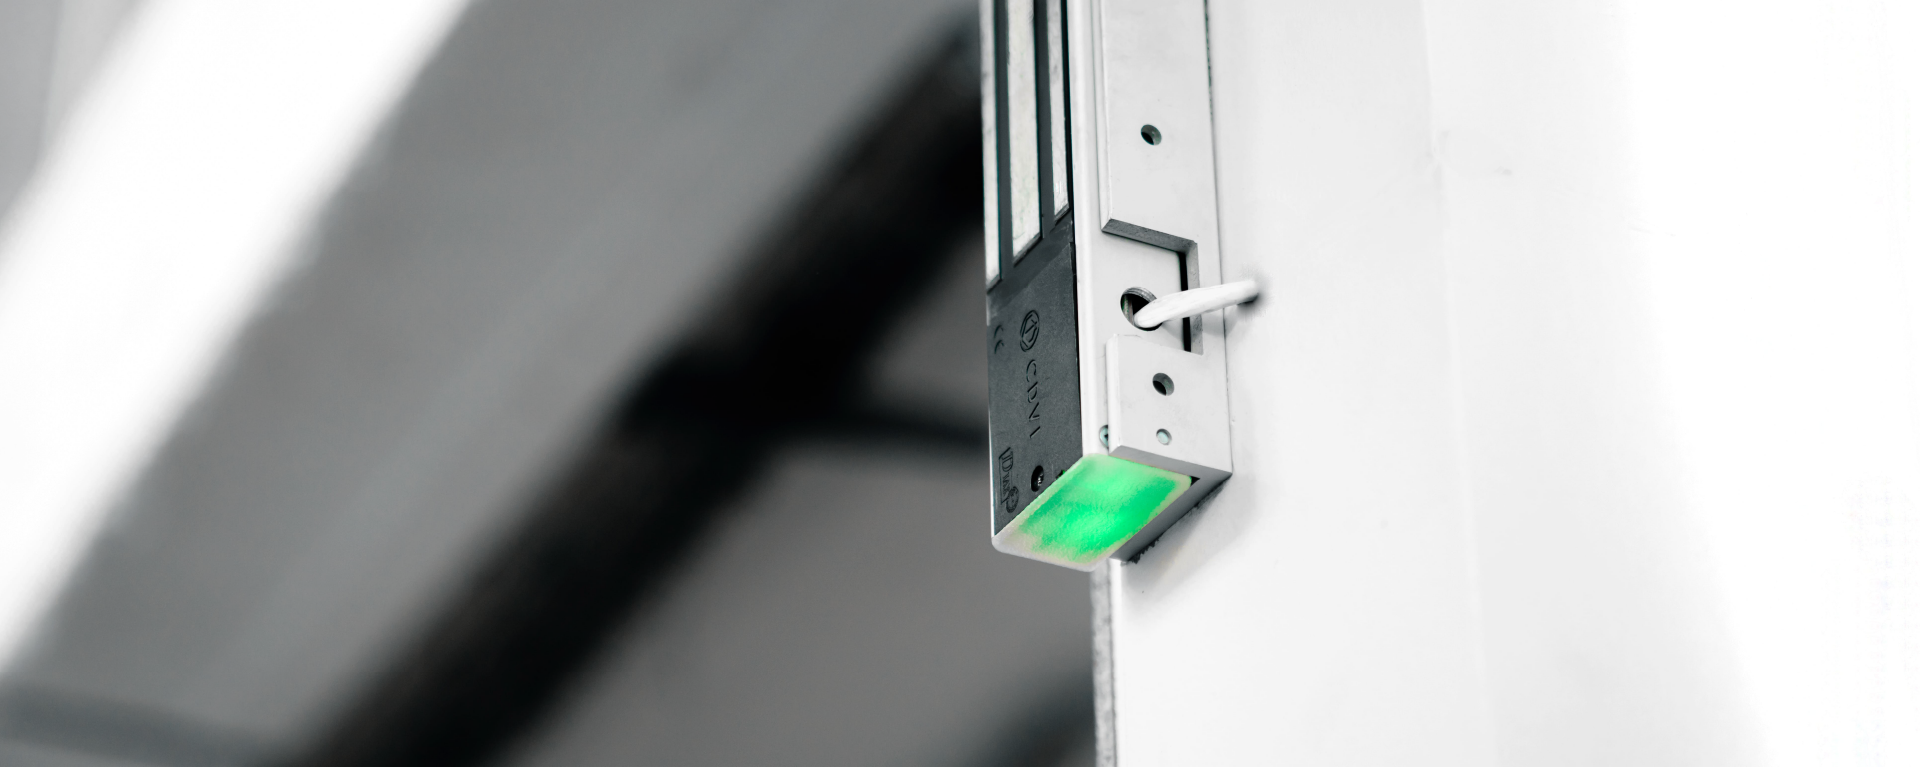 An electromagnetic lock mounted on a door with a green LED at the bottom to indicate its status